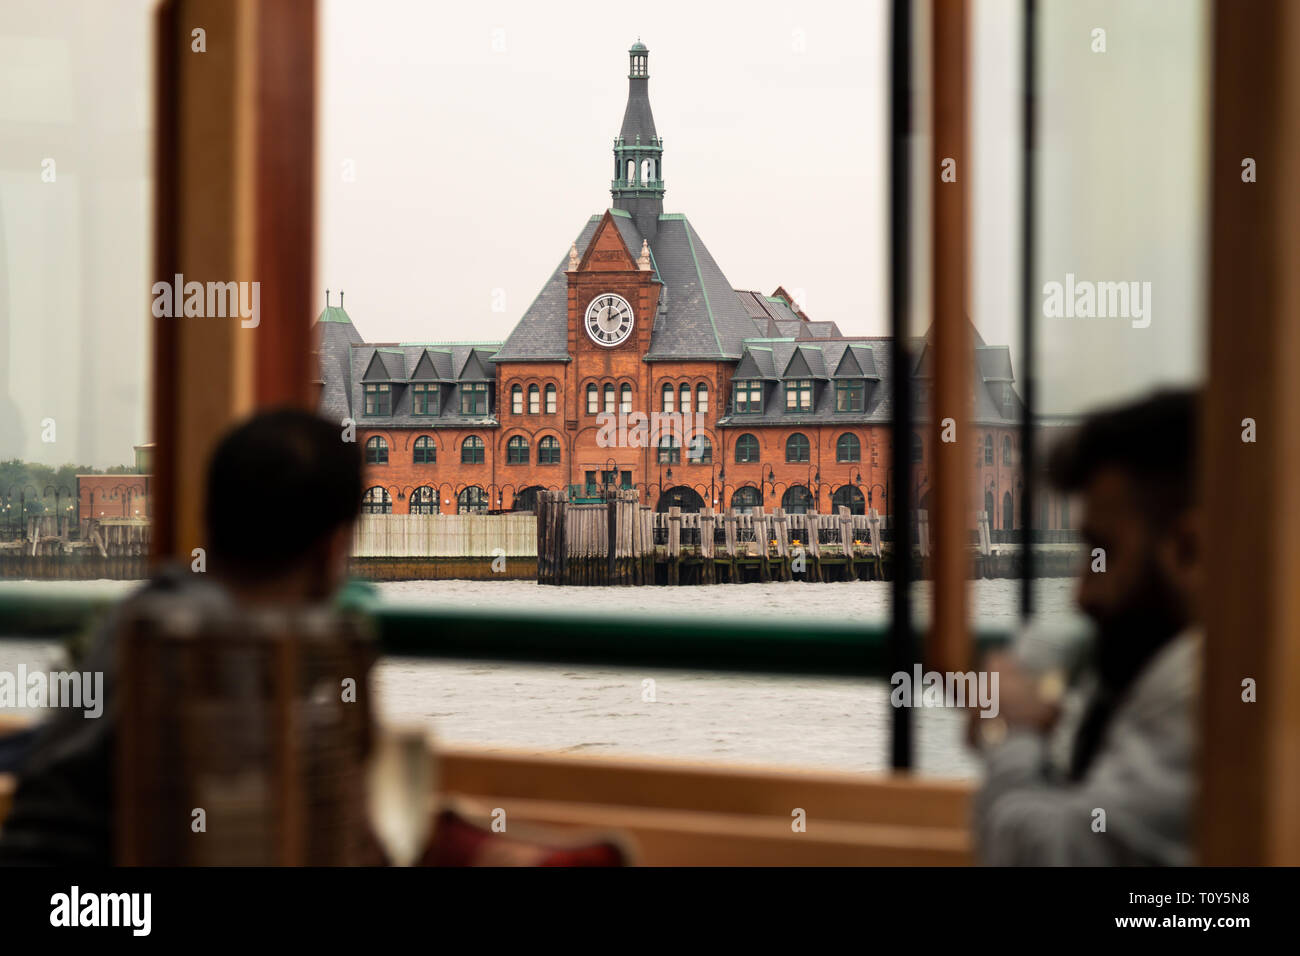 Tourists looking out the window of a boat on the river at the Central Railroad of New Jersey Terminal where ferries take people from New Jersey to Ellis Island to see the Statue of Liberty. Stock Photo